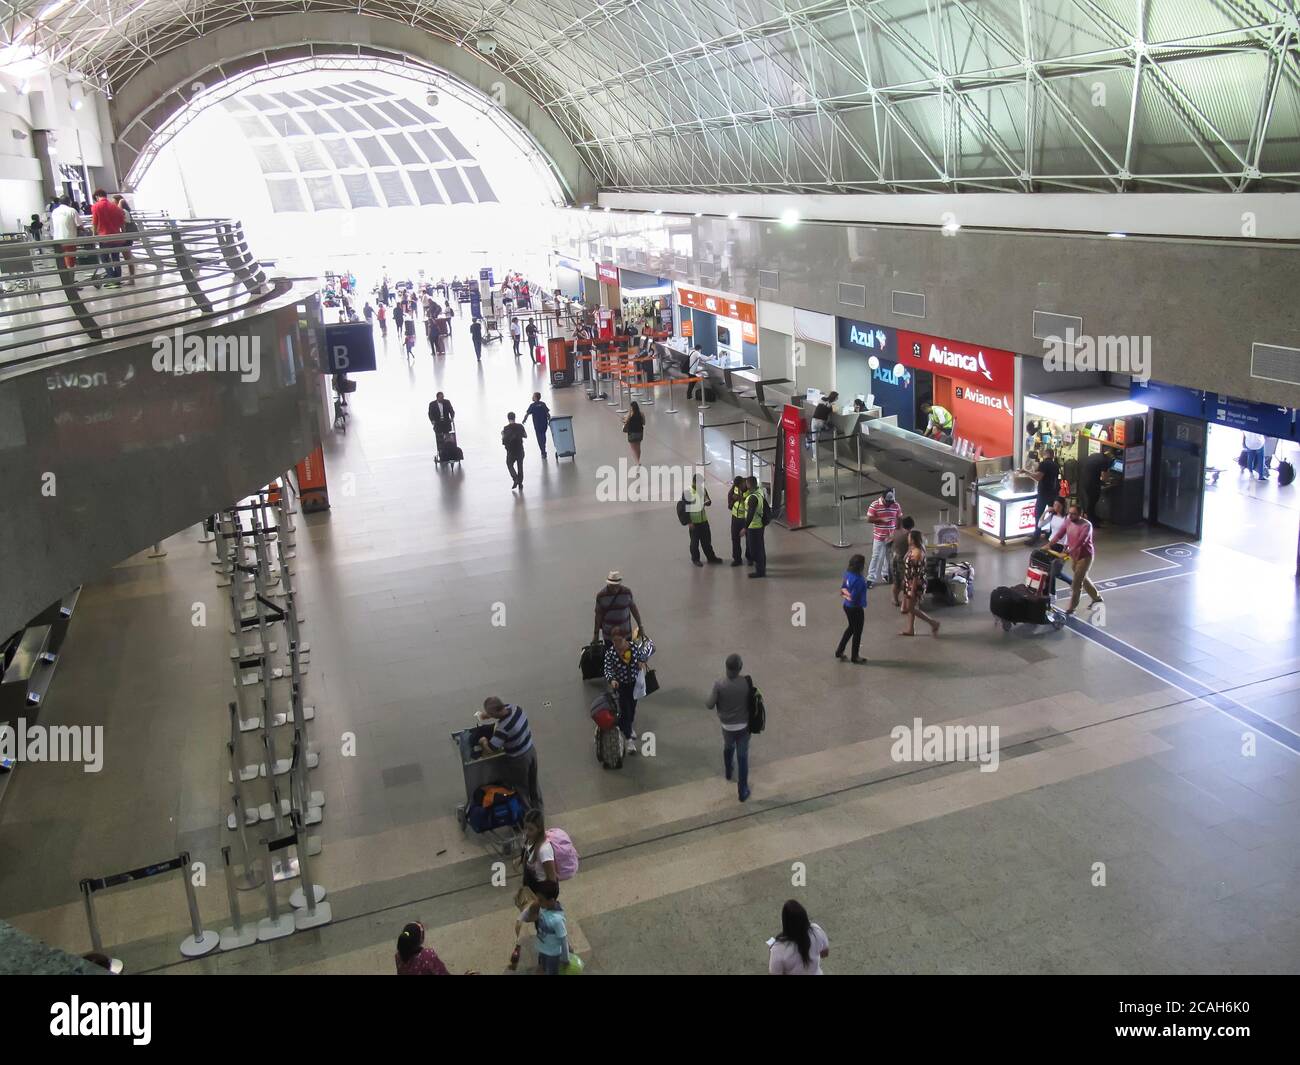 Fortaleza, Ceara / Brazil - July 28, 2018: Movement of passengers on boarding and disembarking in the lobby of the international airport of Fortaleza Stock Photo